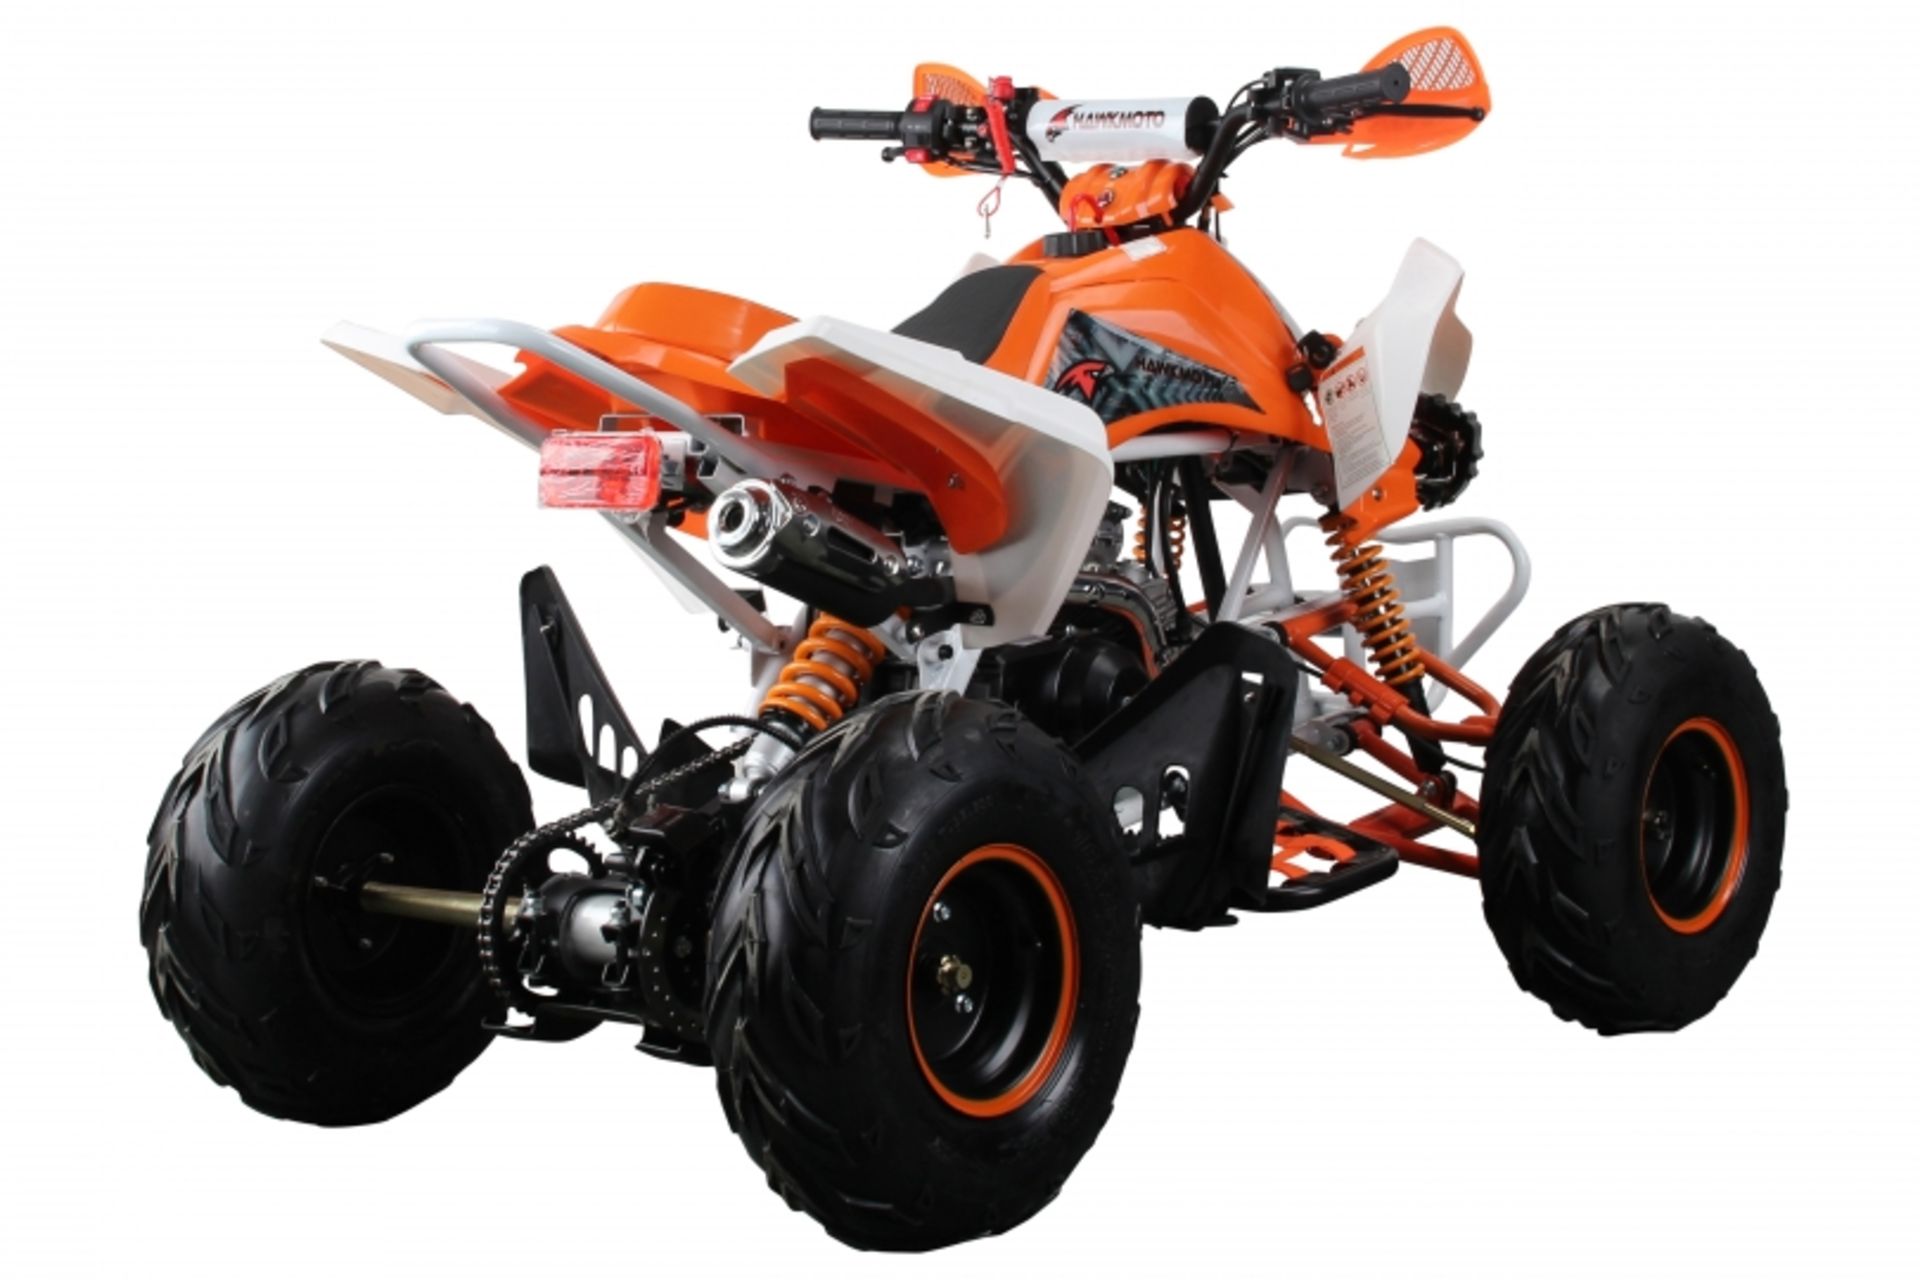 V Brand New 125cc Interceptor SV2 4 Stroke Quad Bike With Reverse Gear - Double Front Suspension/ - Image 4 of 5